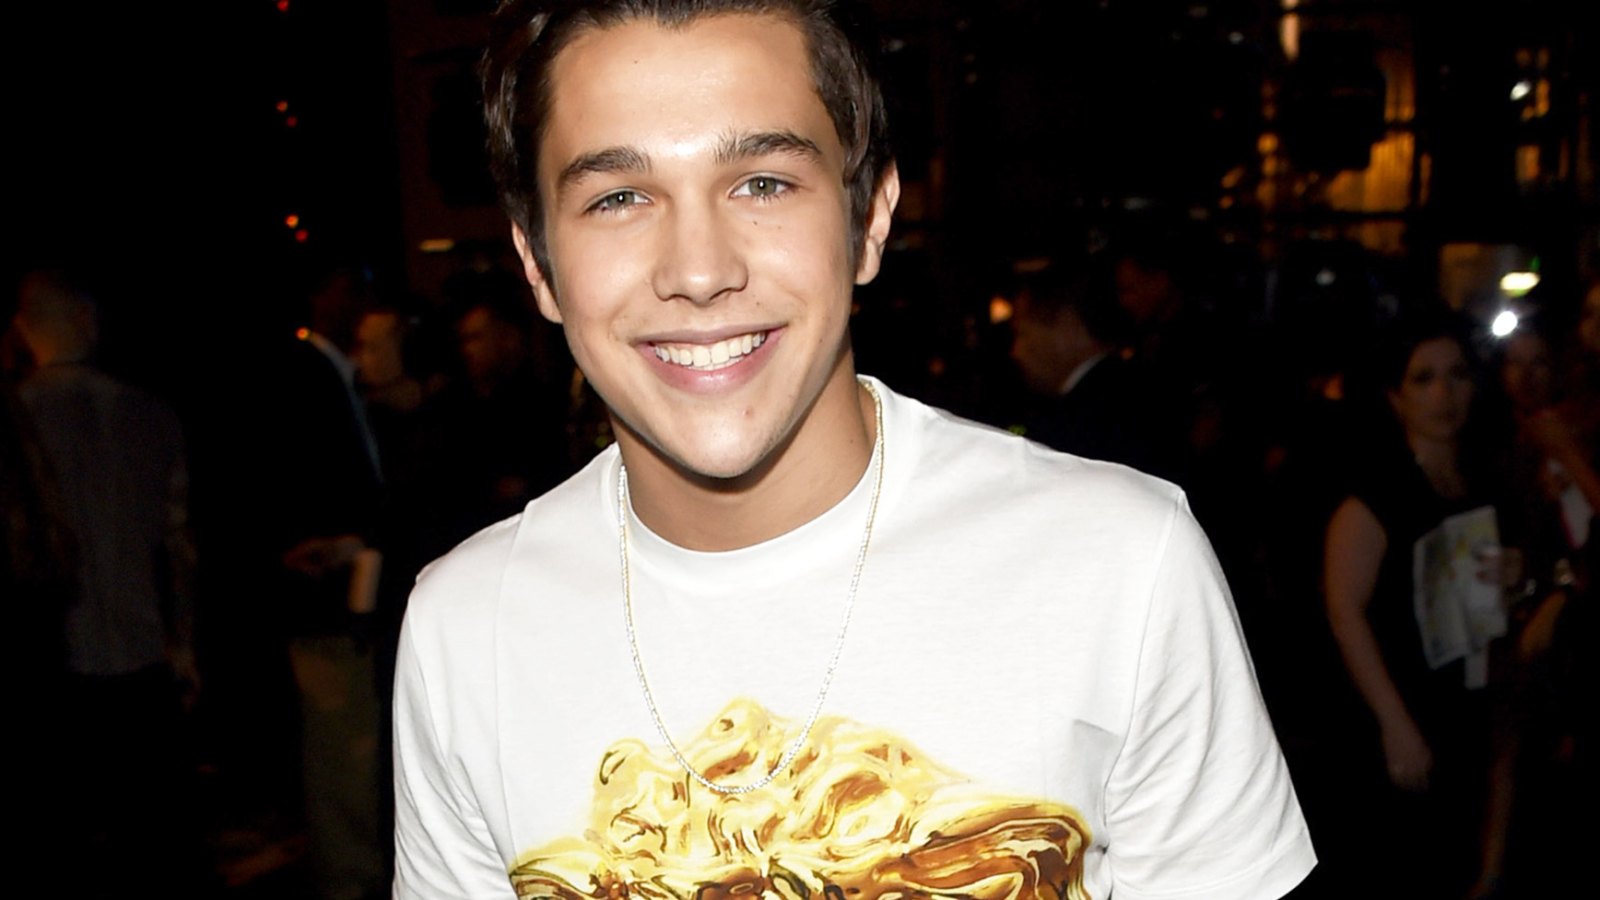 25 Things You Don't Know About Austin Mahone